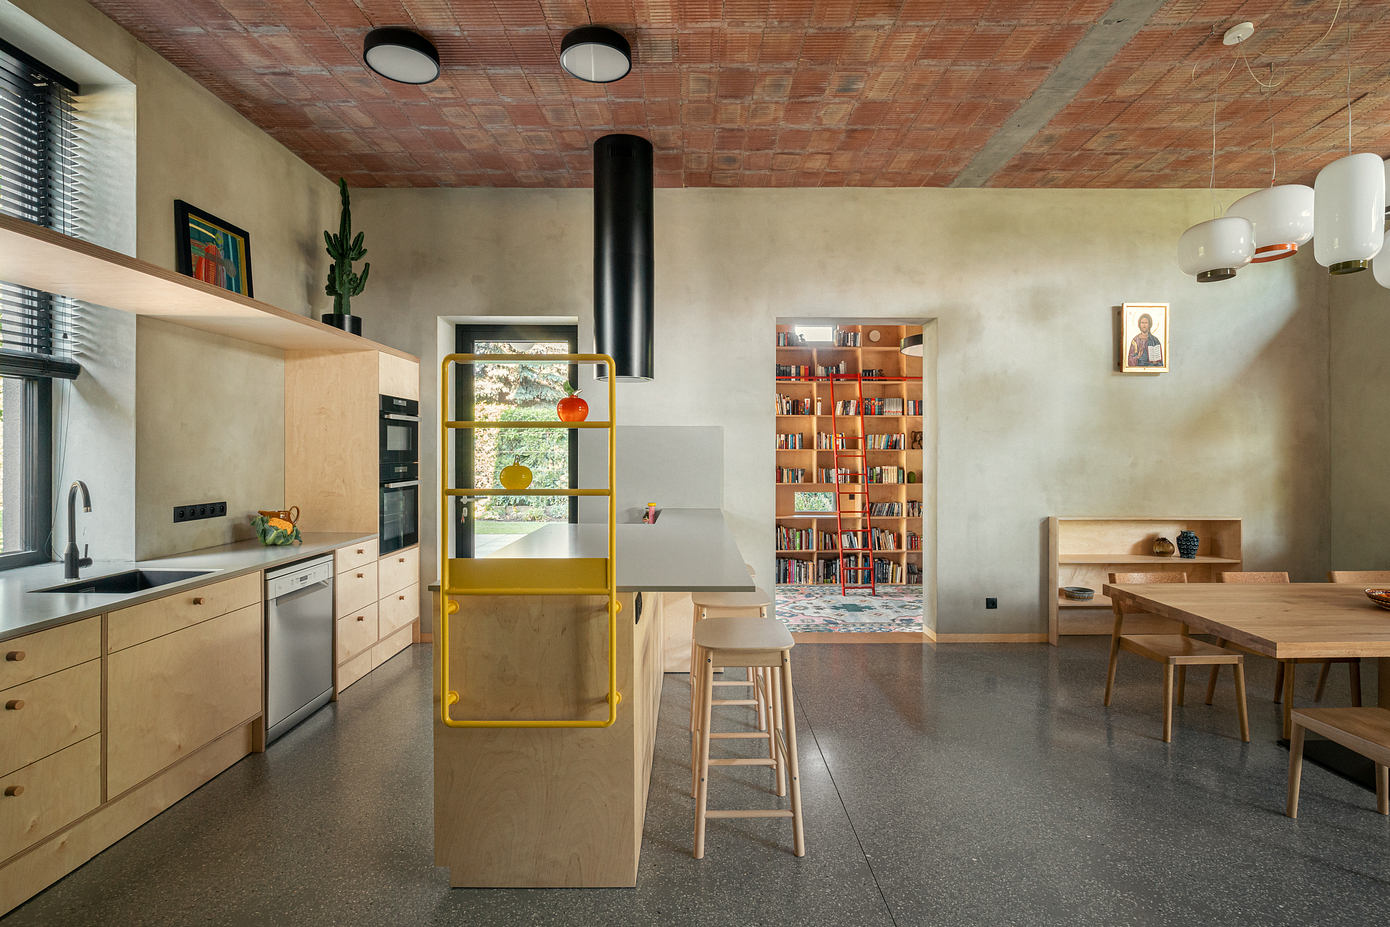 Zosia’s House: A Modern Take on Single-Family Living in Gdańsk